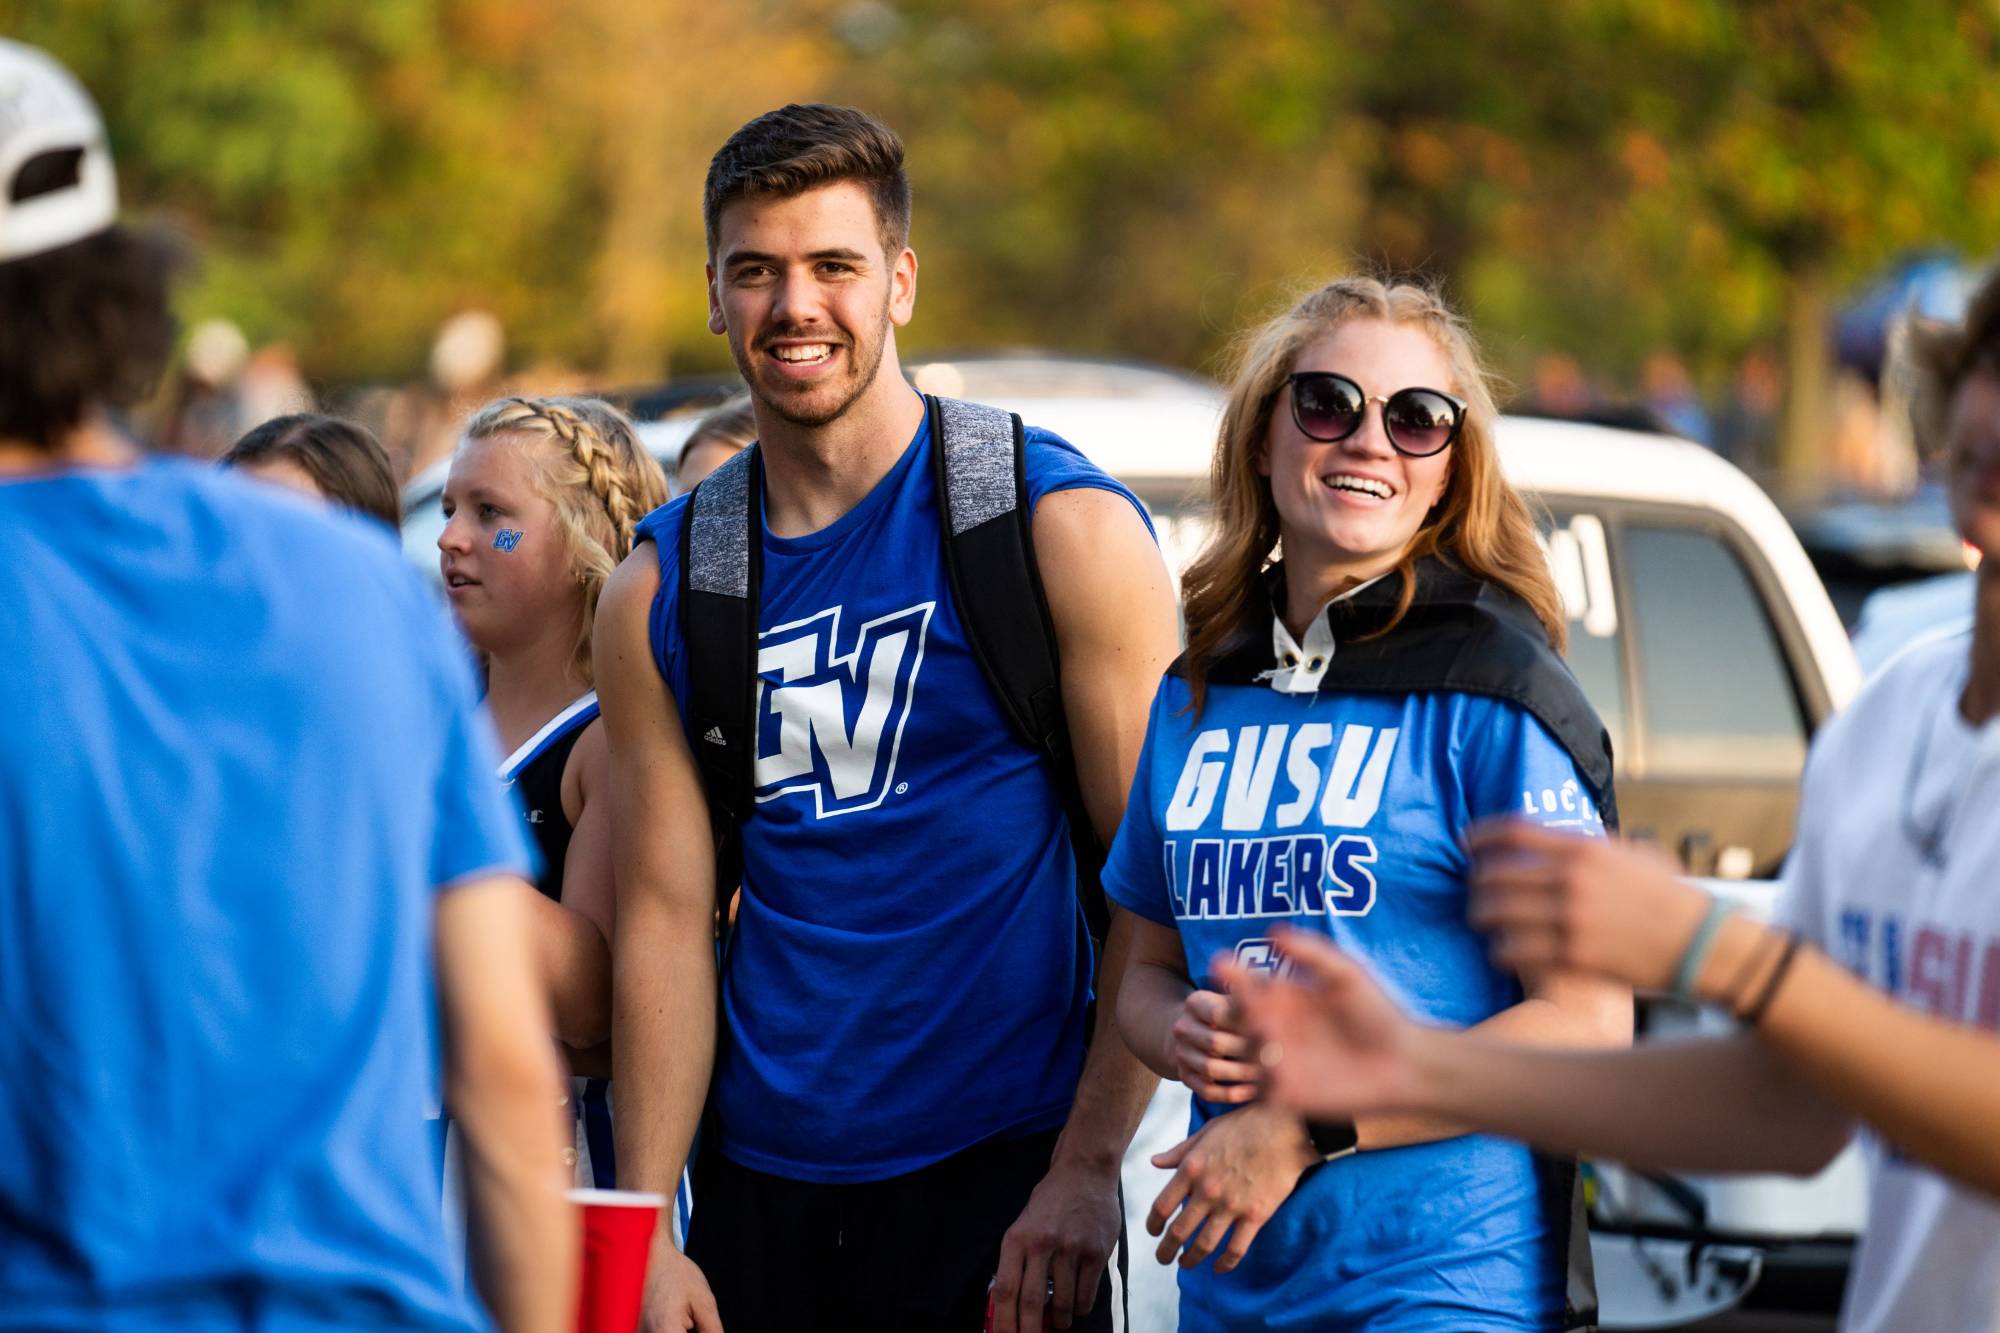 Students smile wearing GVSU gear before a football game